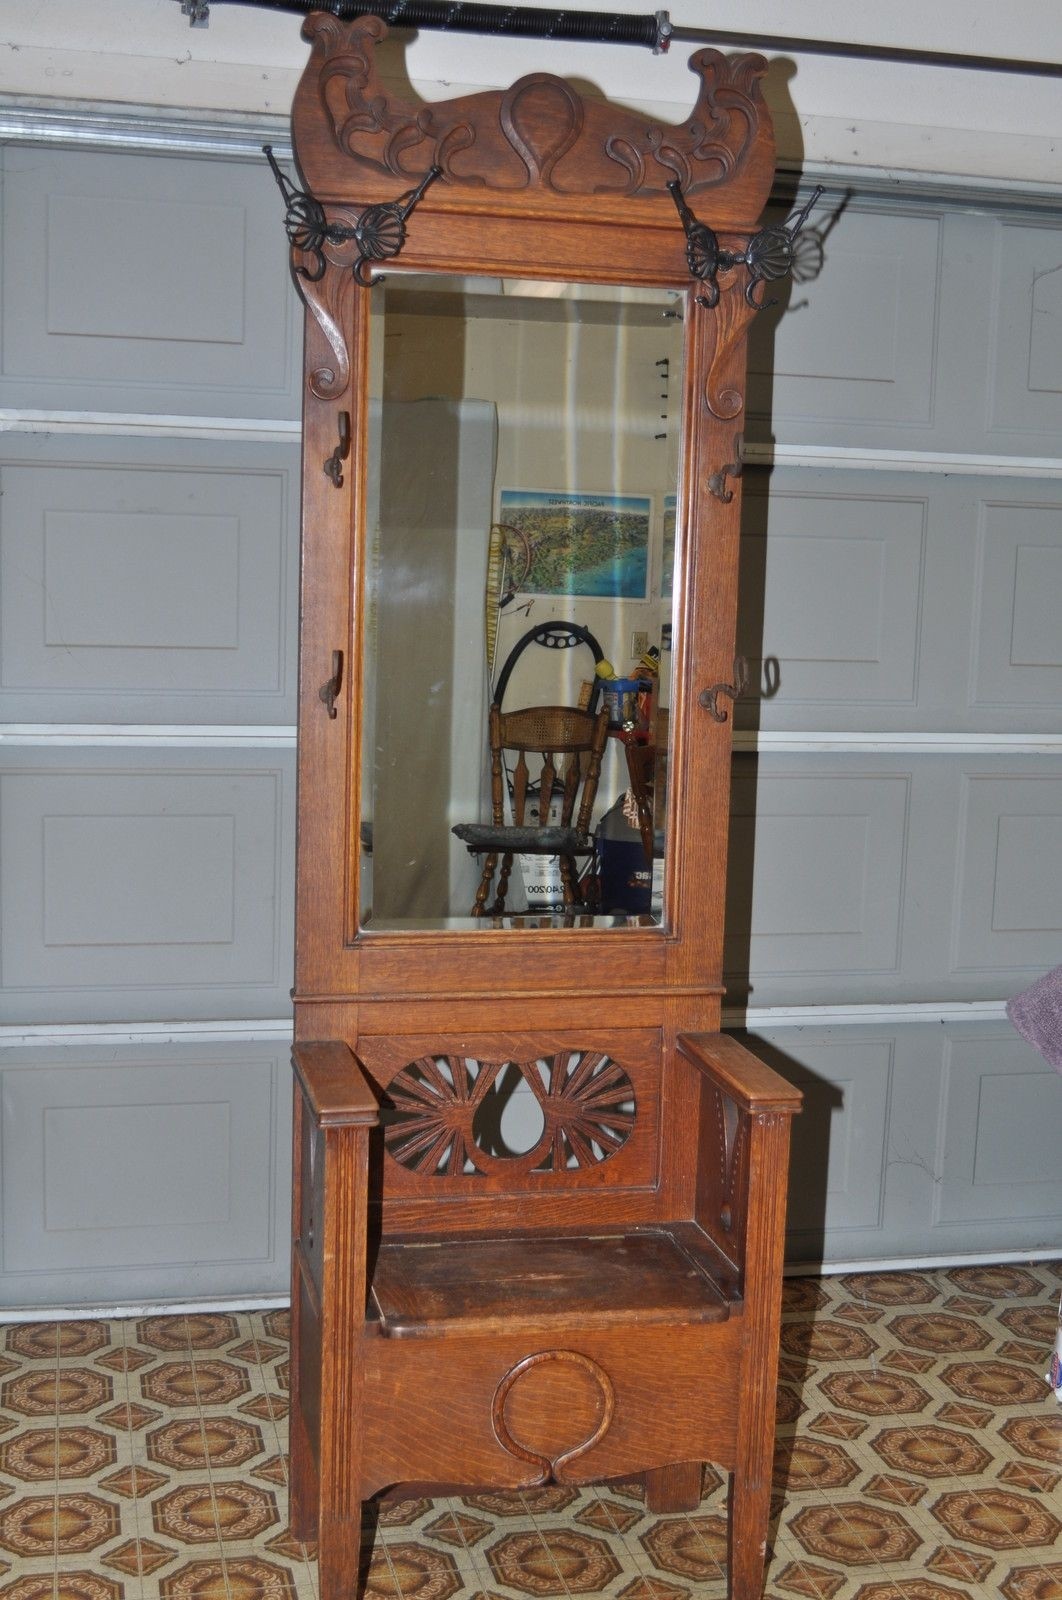 Antique Oak Entry Hall Tree Storage Bench Beveled Mirror Butterfly Hook